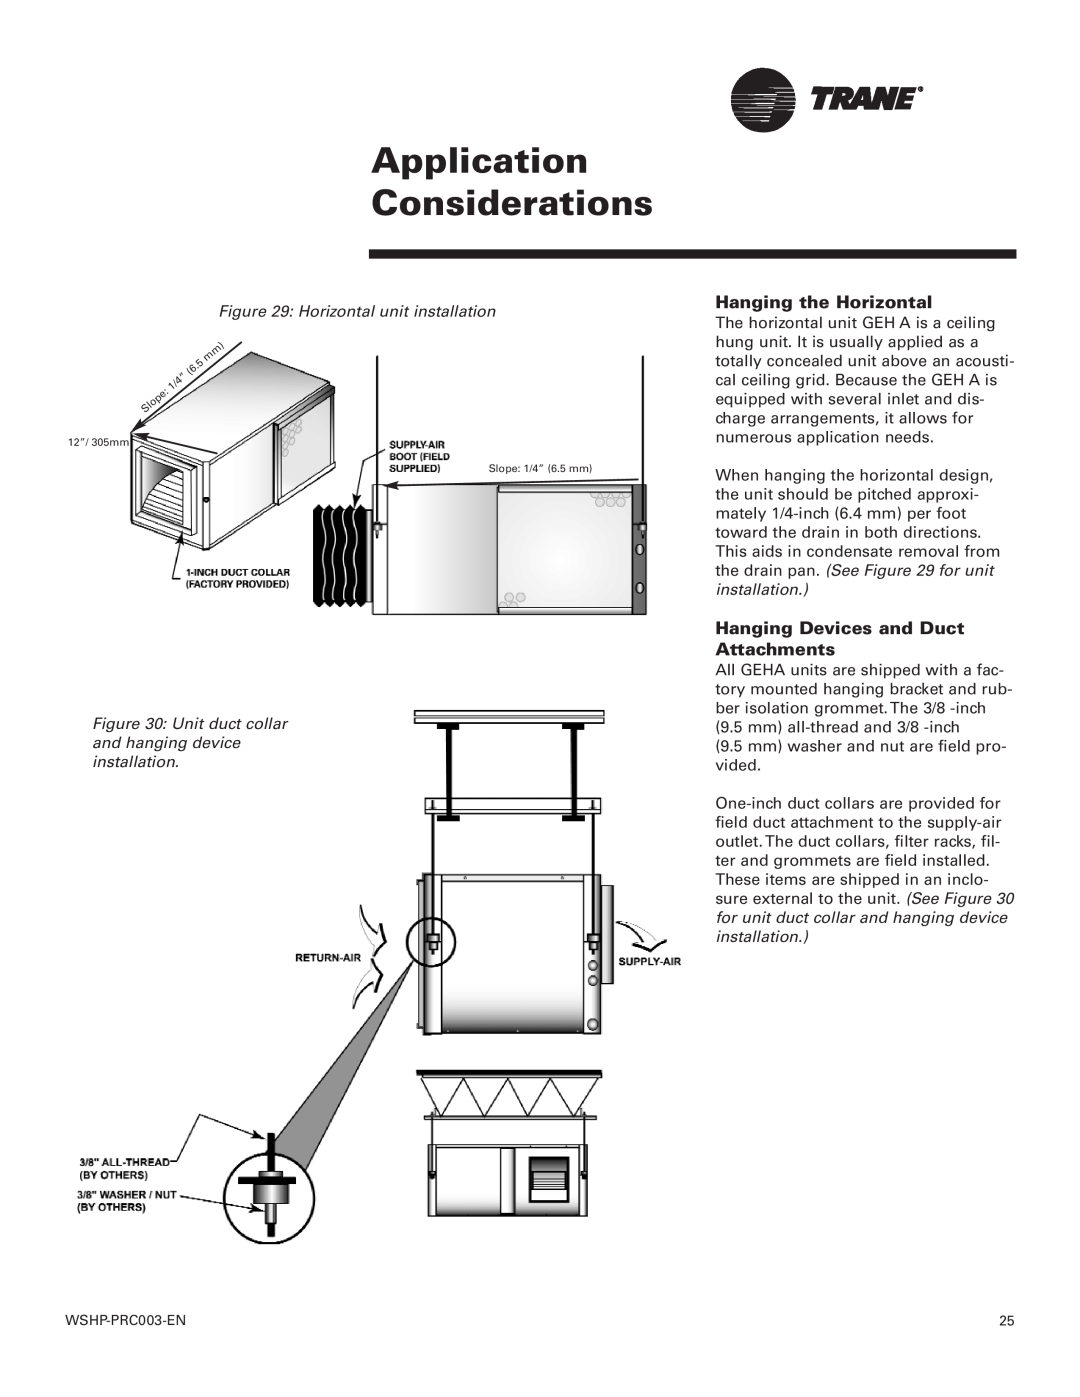 Trane 120 GEH, Model 180 GEV manual Application Considerations, Hanging the Horizontal, Hanging Devices and Duct Attachments 